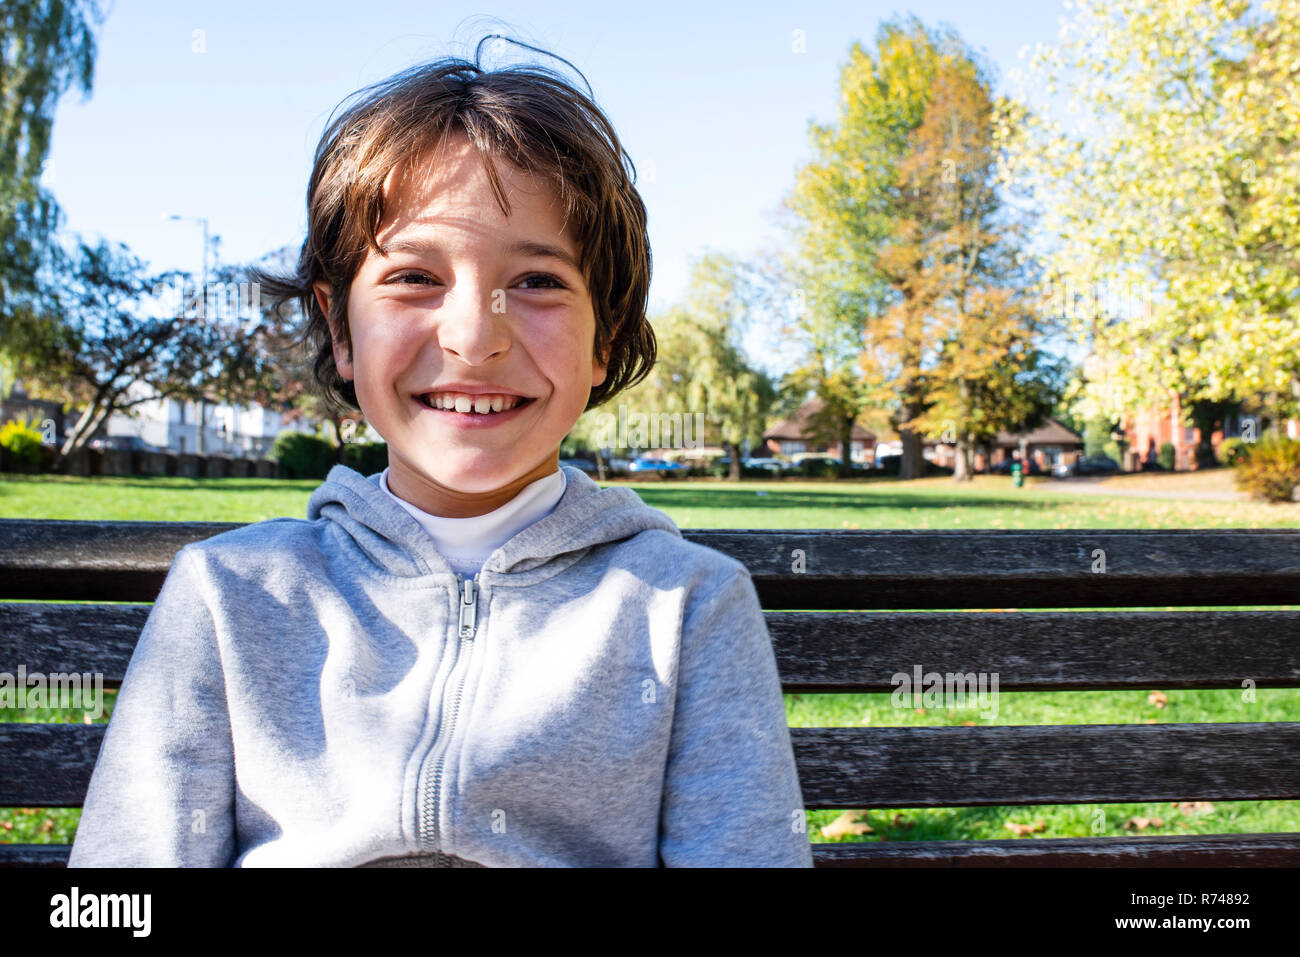 Smiling boy in park Stock Photo